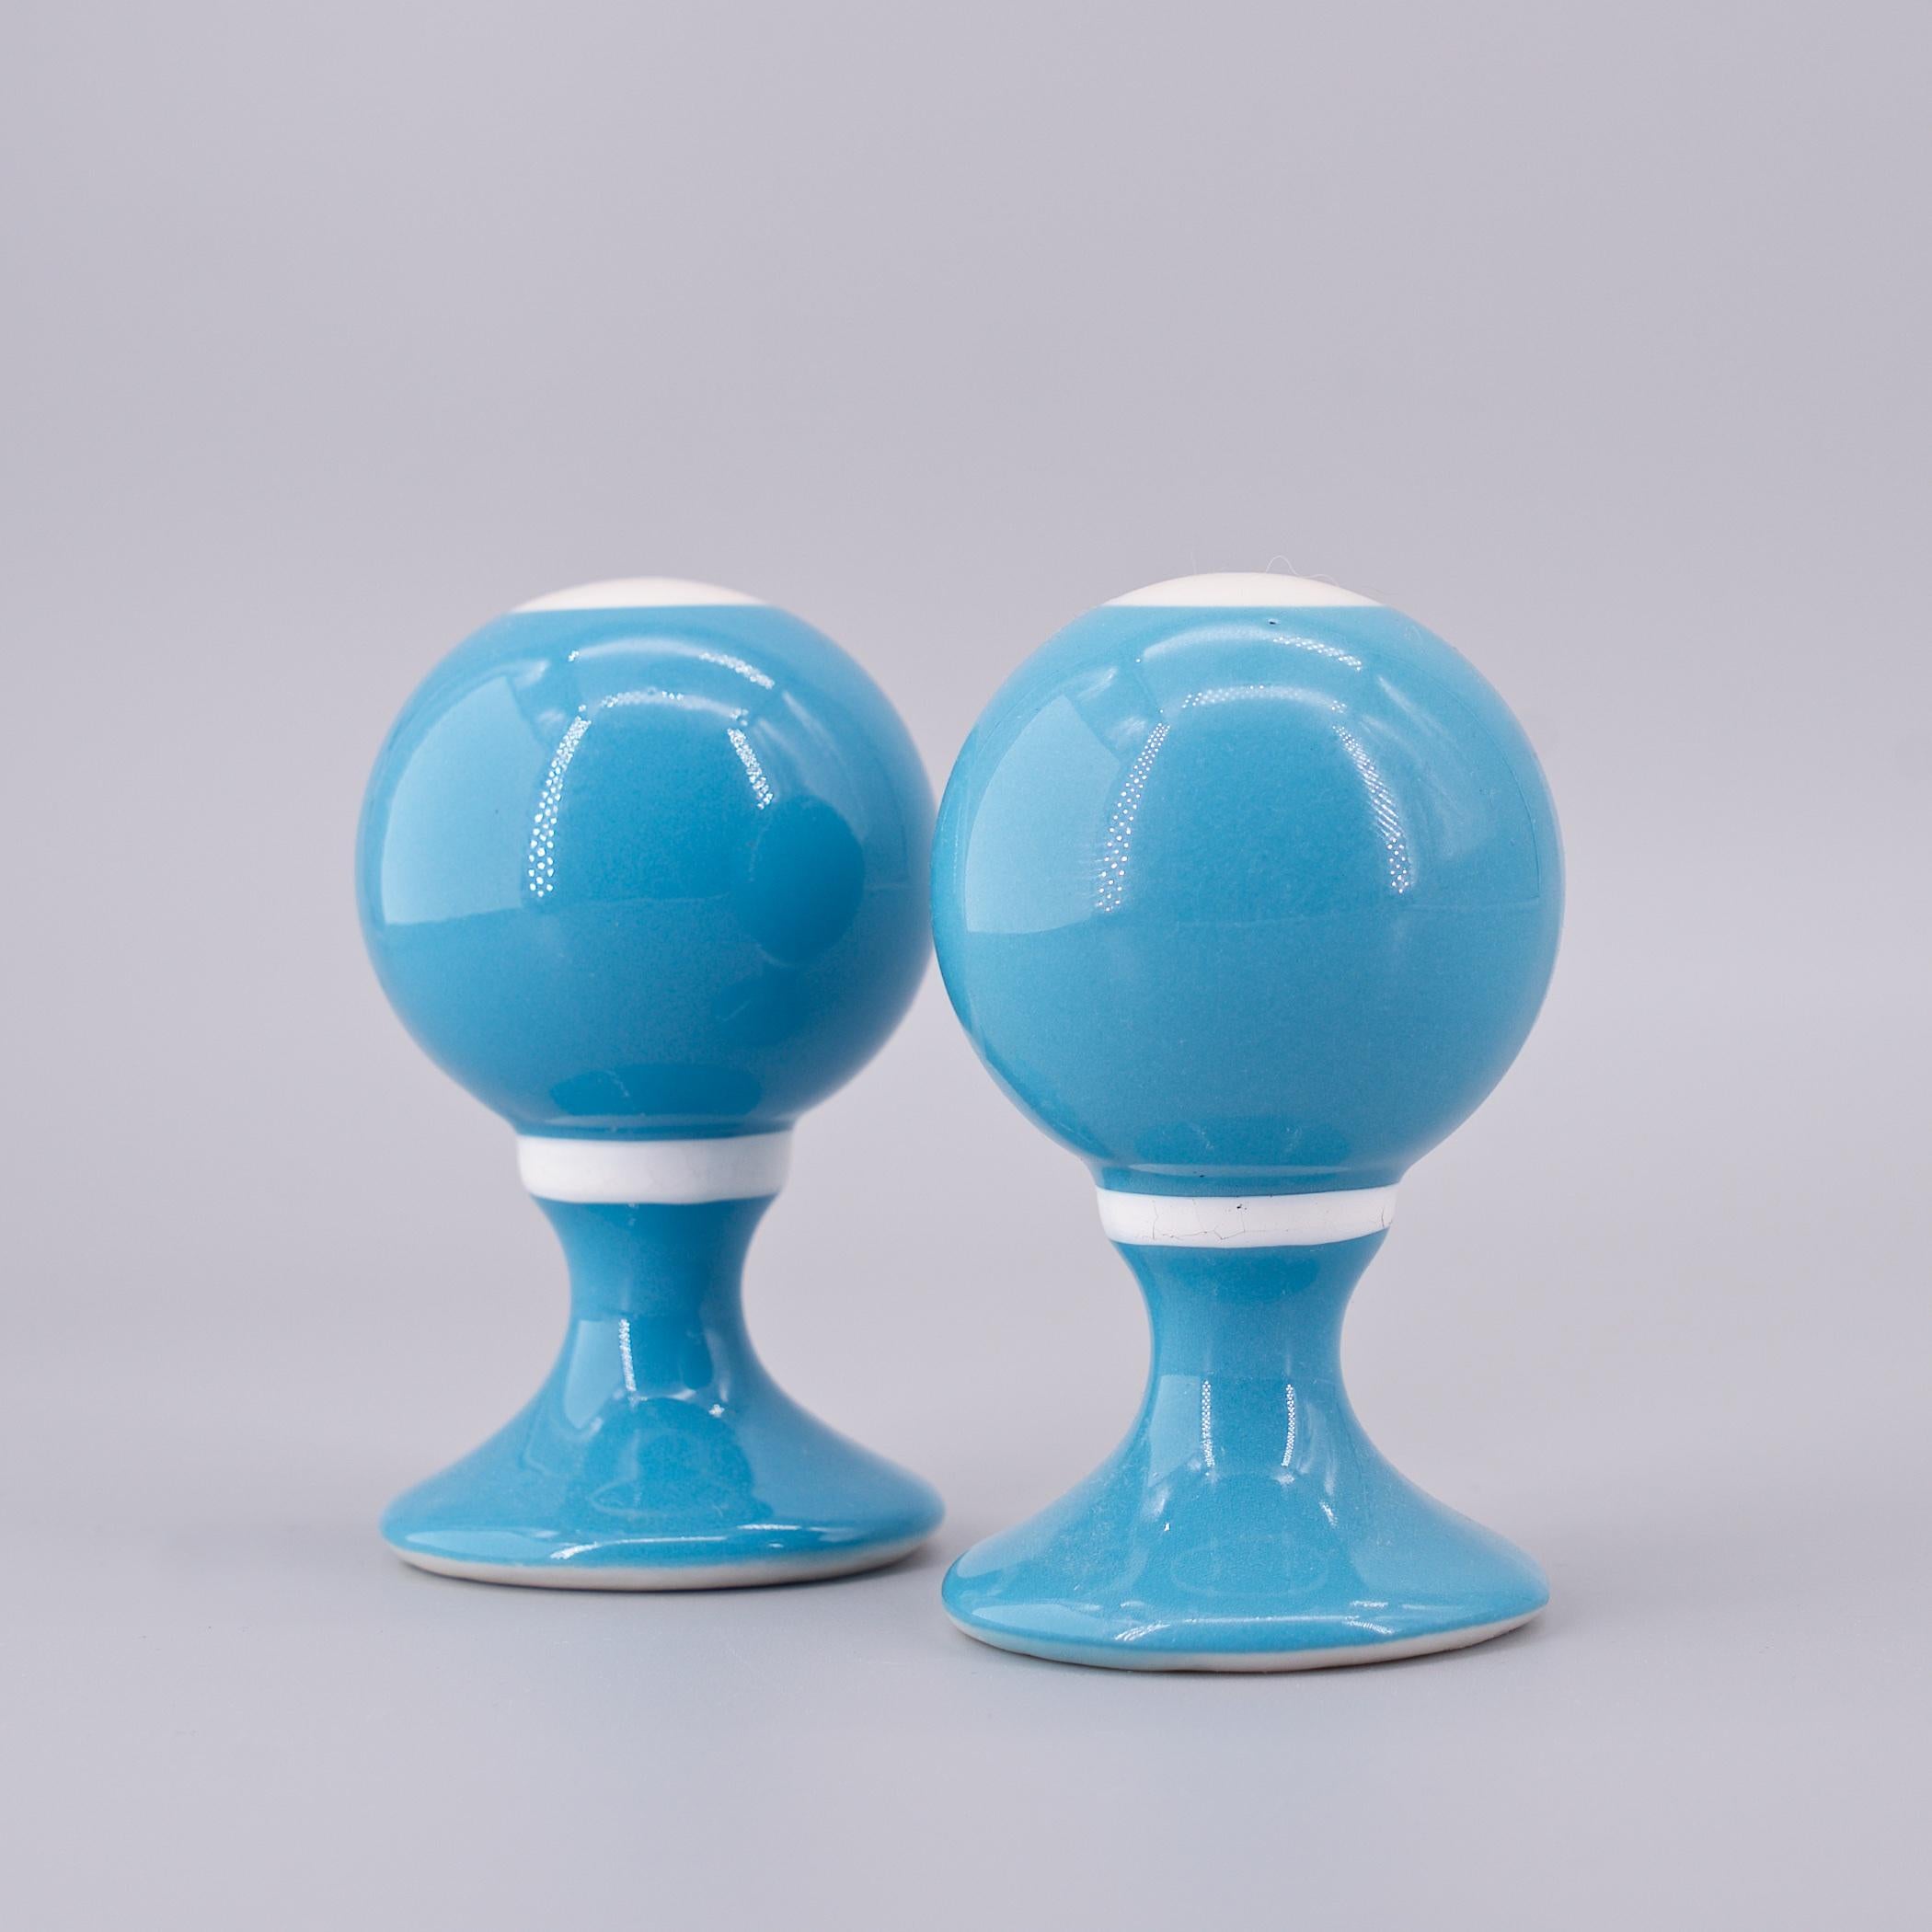 Alexander Girard for Mayer China / Minners. Made in the 1960s. Bollard-form salt shakers. Identical each with single hole. No chips, no cracks. Some crazing to the white bands around the neck.